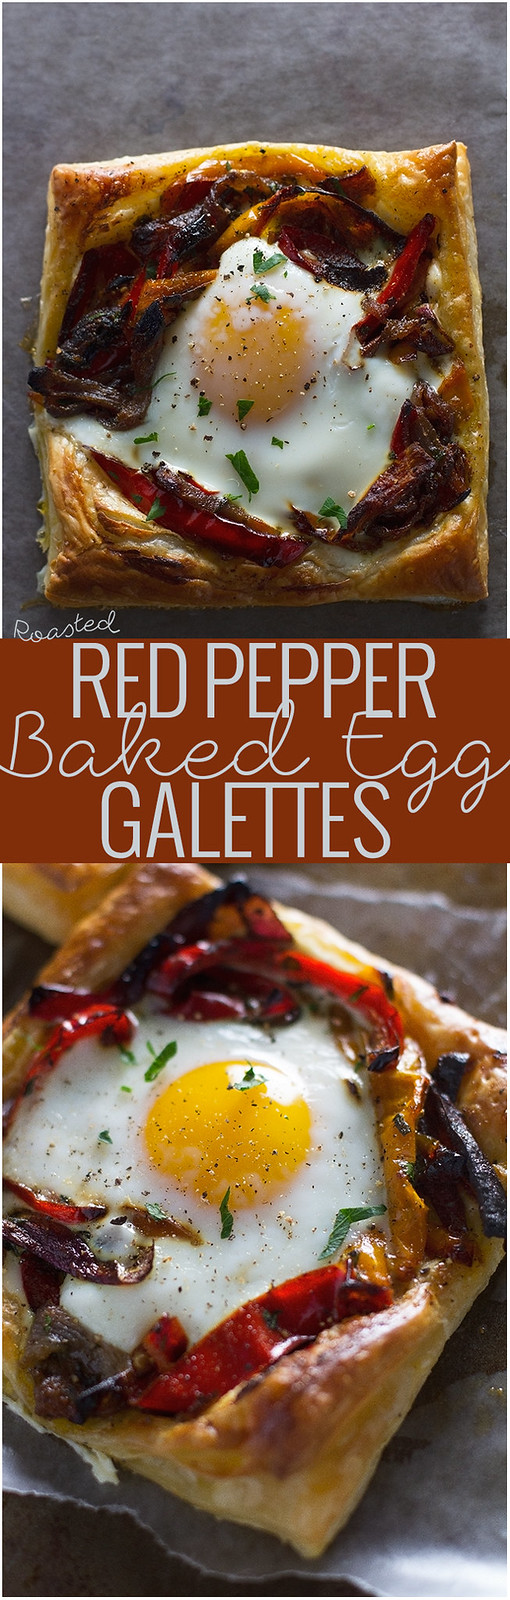 Roasted Red Pepper Baked Egg Galettes - So flavorful and perfect for brunch! #eggs #brunch #breakfast #galettes | Littlespicejar.com